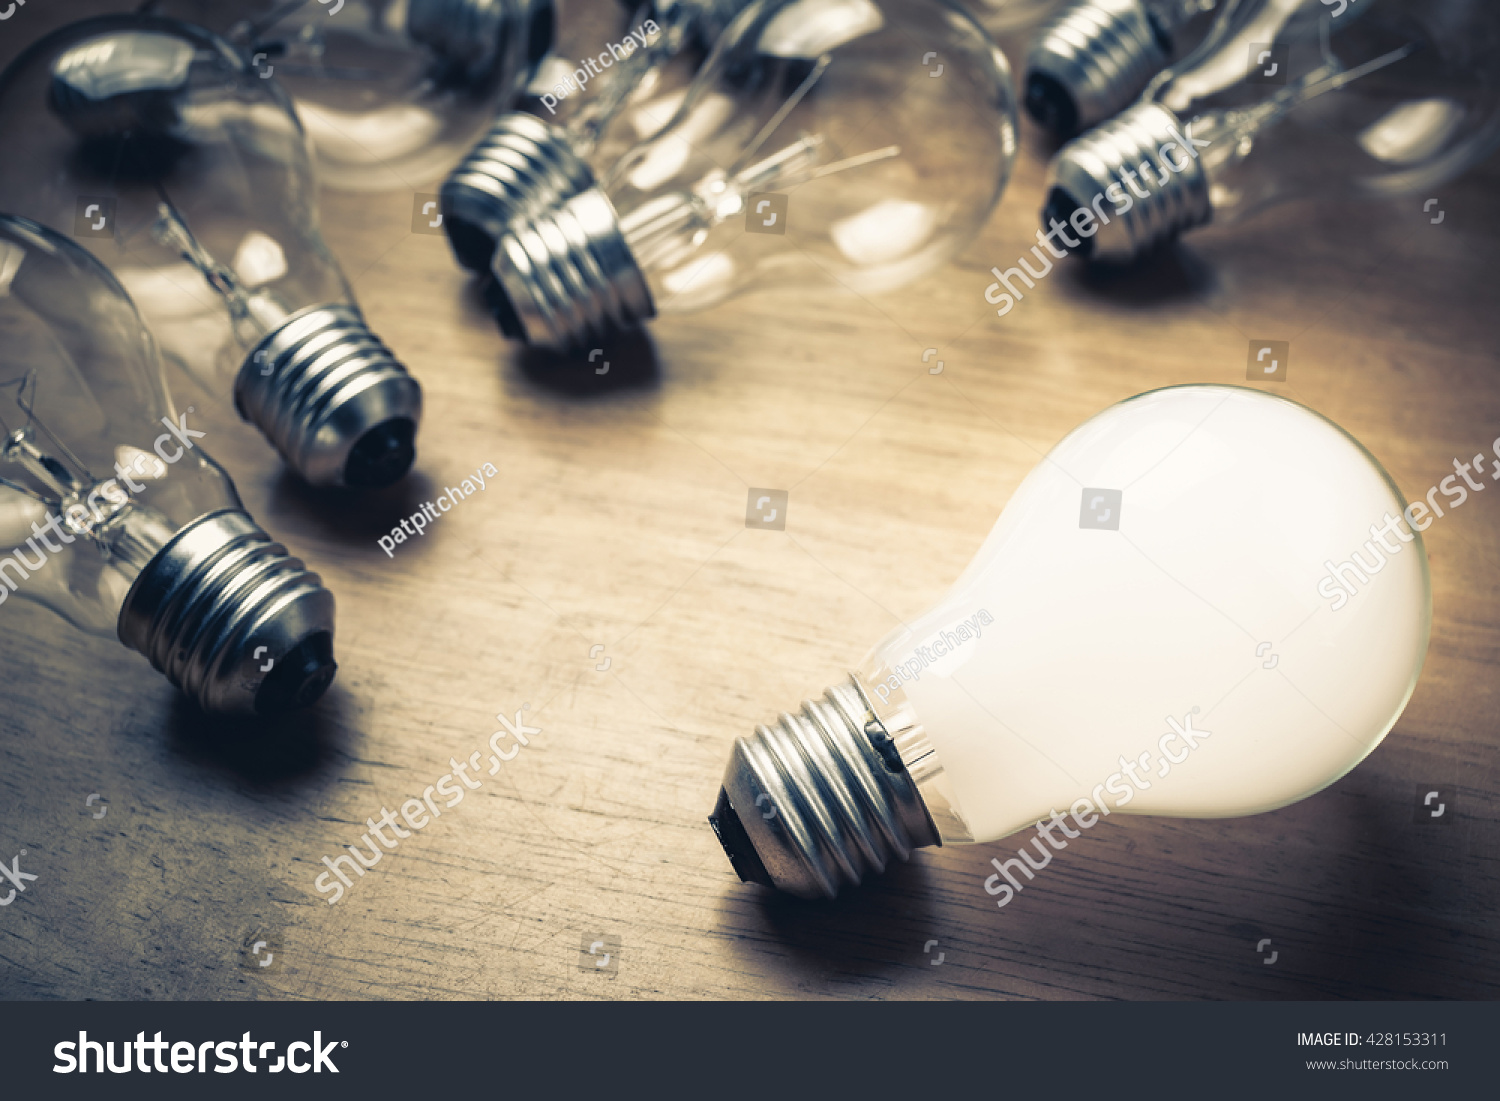 White light bulb glowing separate from the others #428153311